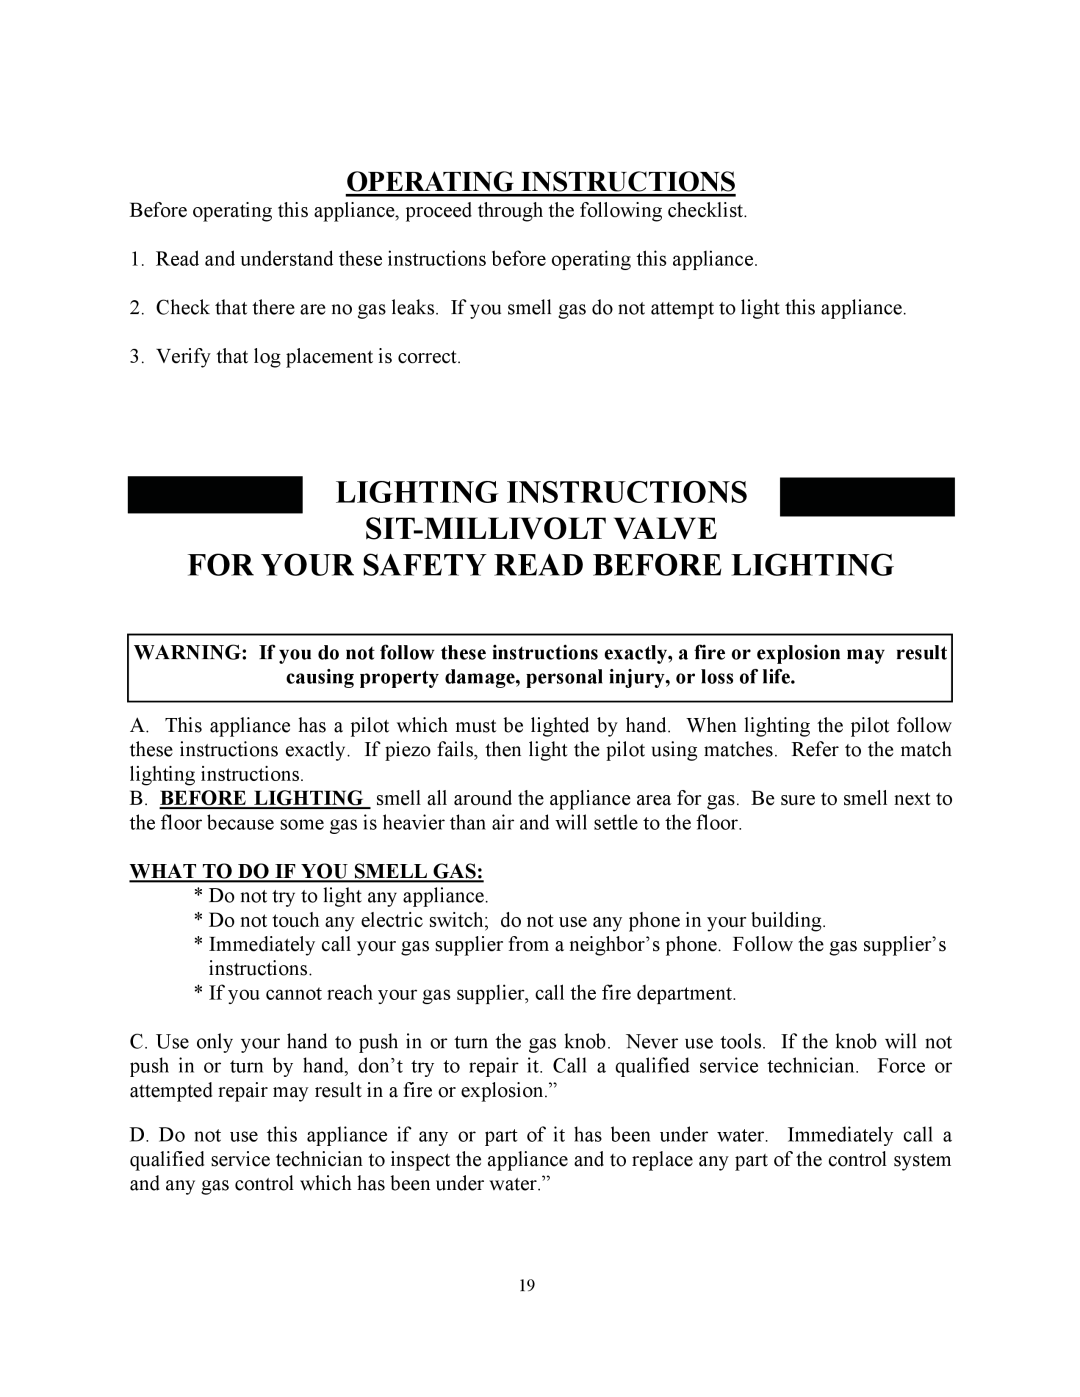 New Buck Corporation 34 manual Lighting Instructions Sit-Millivoltvalve, For Your Safety Read Before Lighting 